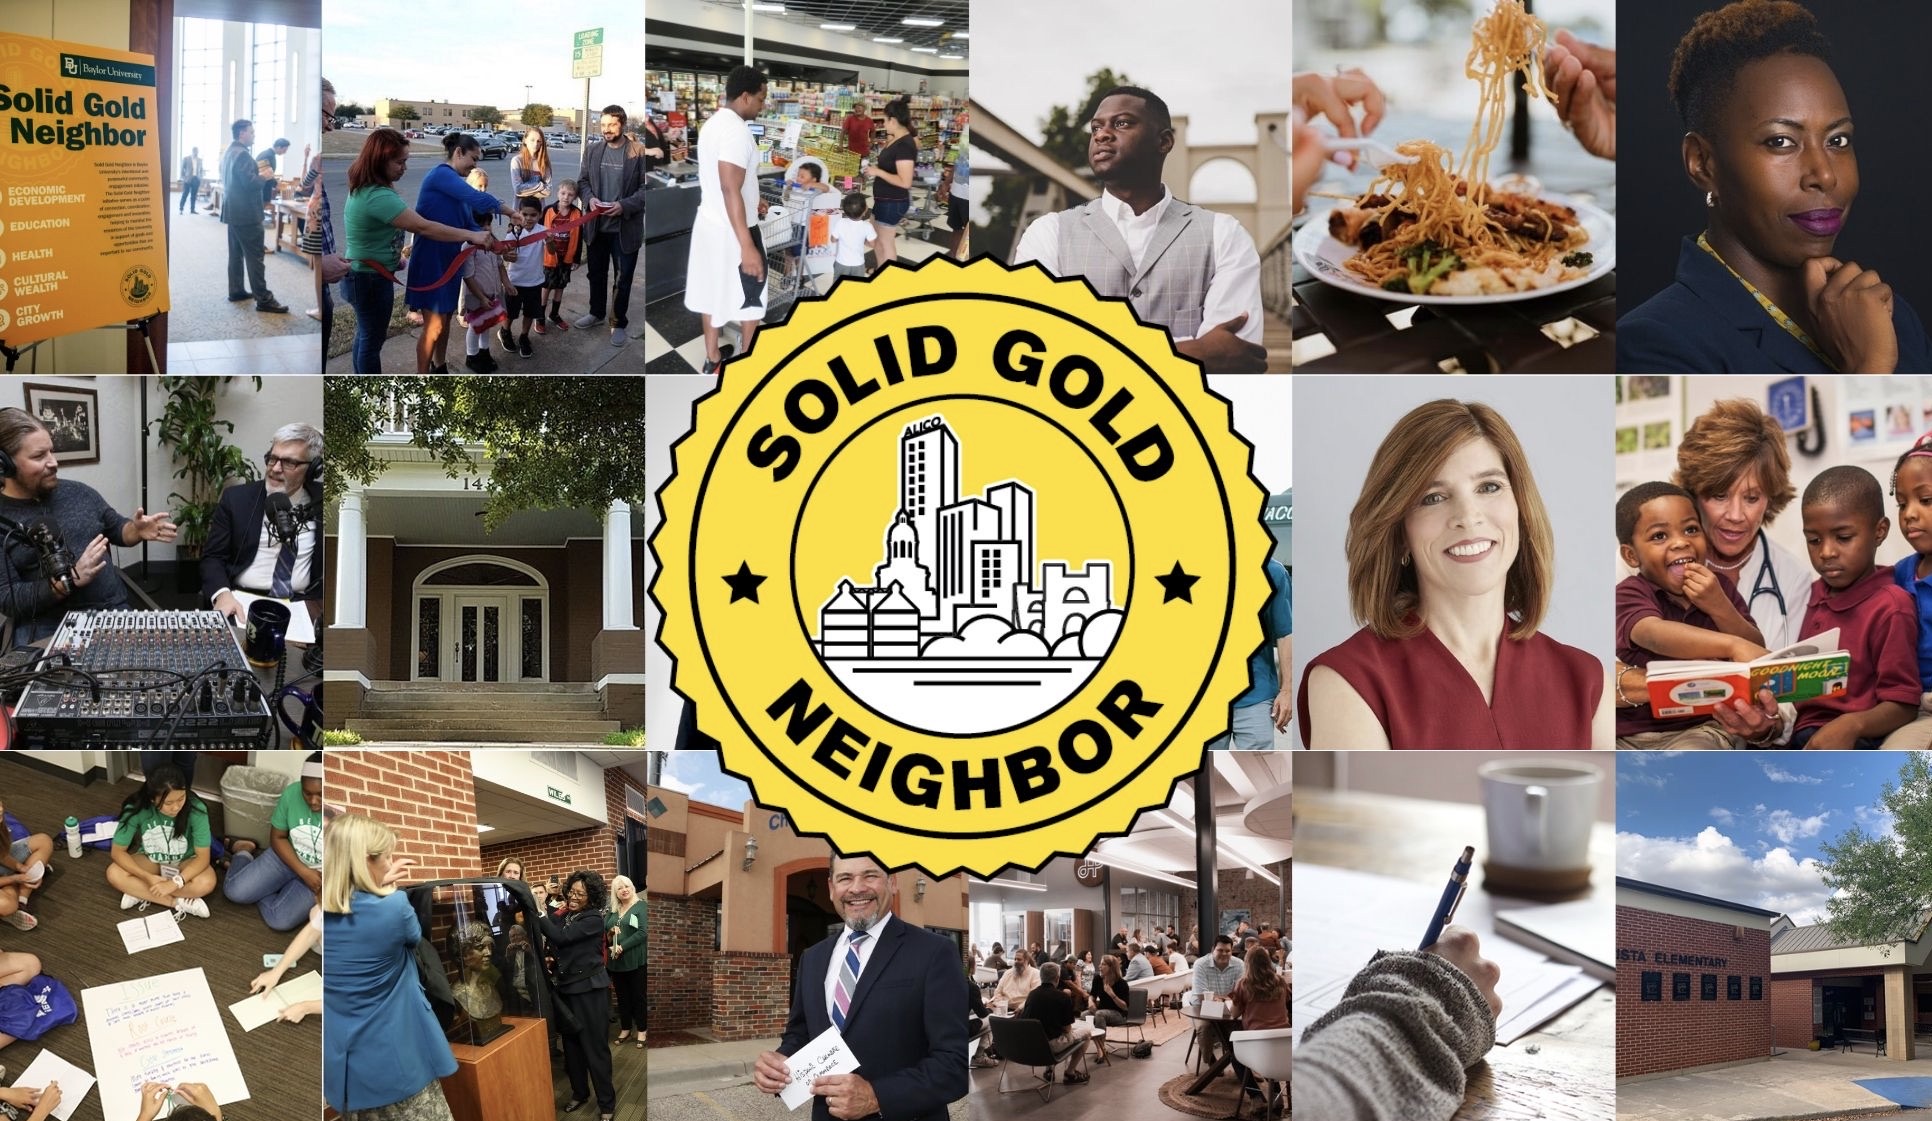 Solid Gold Neighbor: A photo collage of Waco community leaders and events